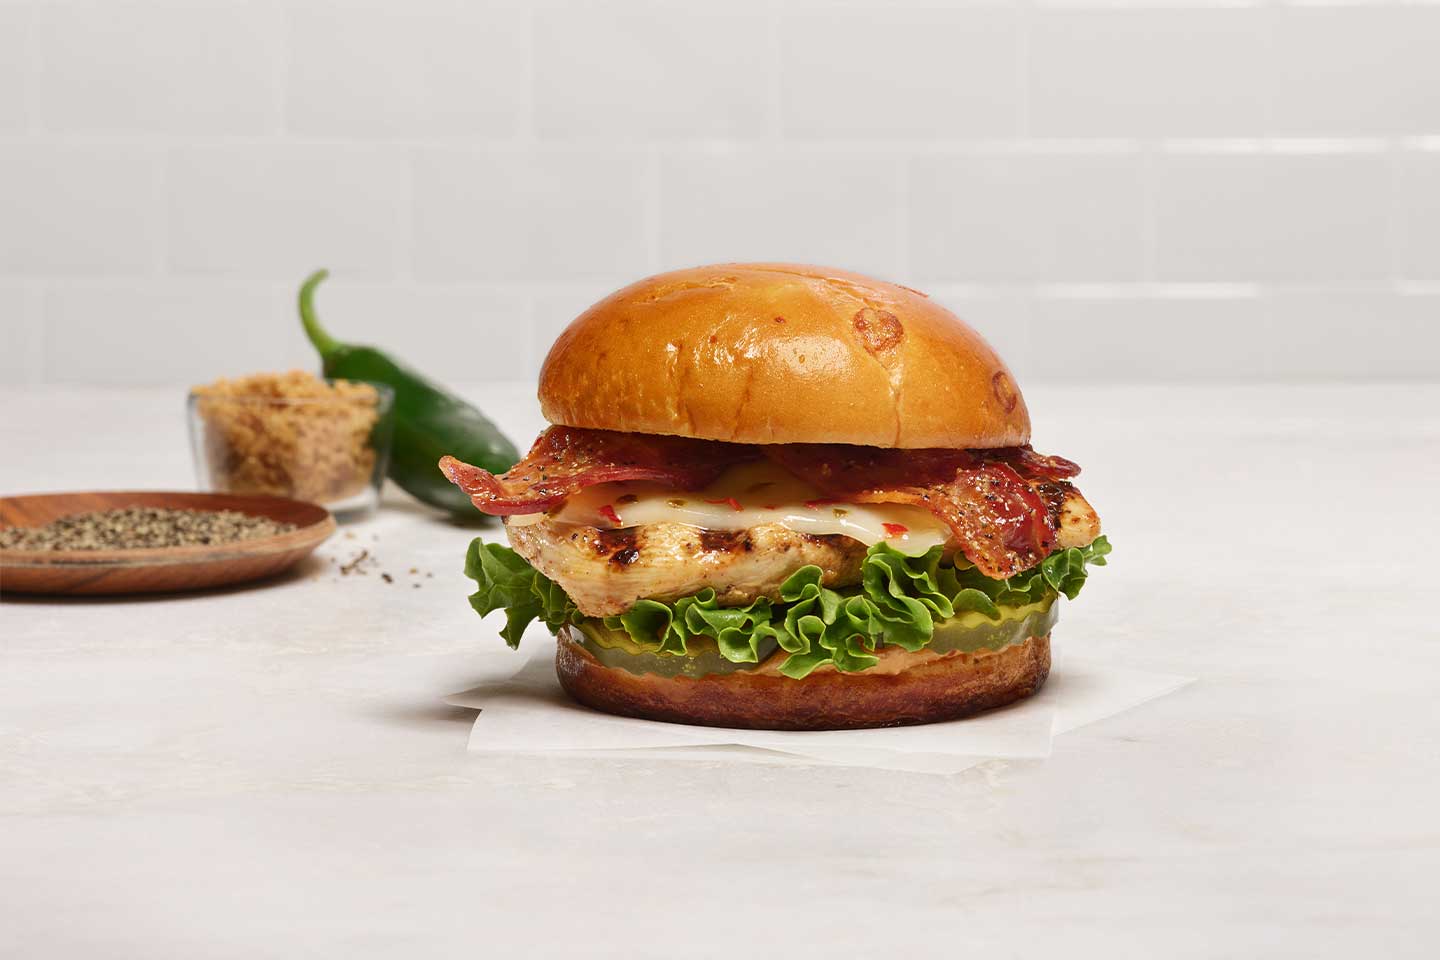 The Maple Pepper Bacon Sandwich is made with a lemon herb marinated boneless breast of chicken, grilled for a tender and juicy backyard-smoky taste.